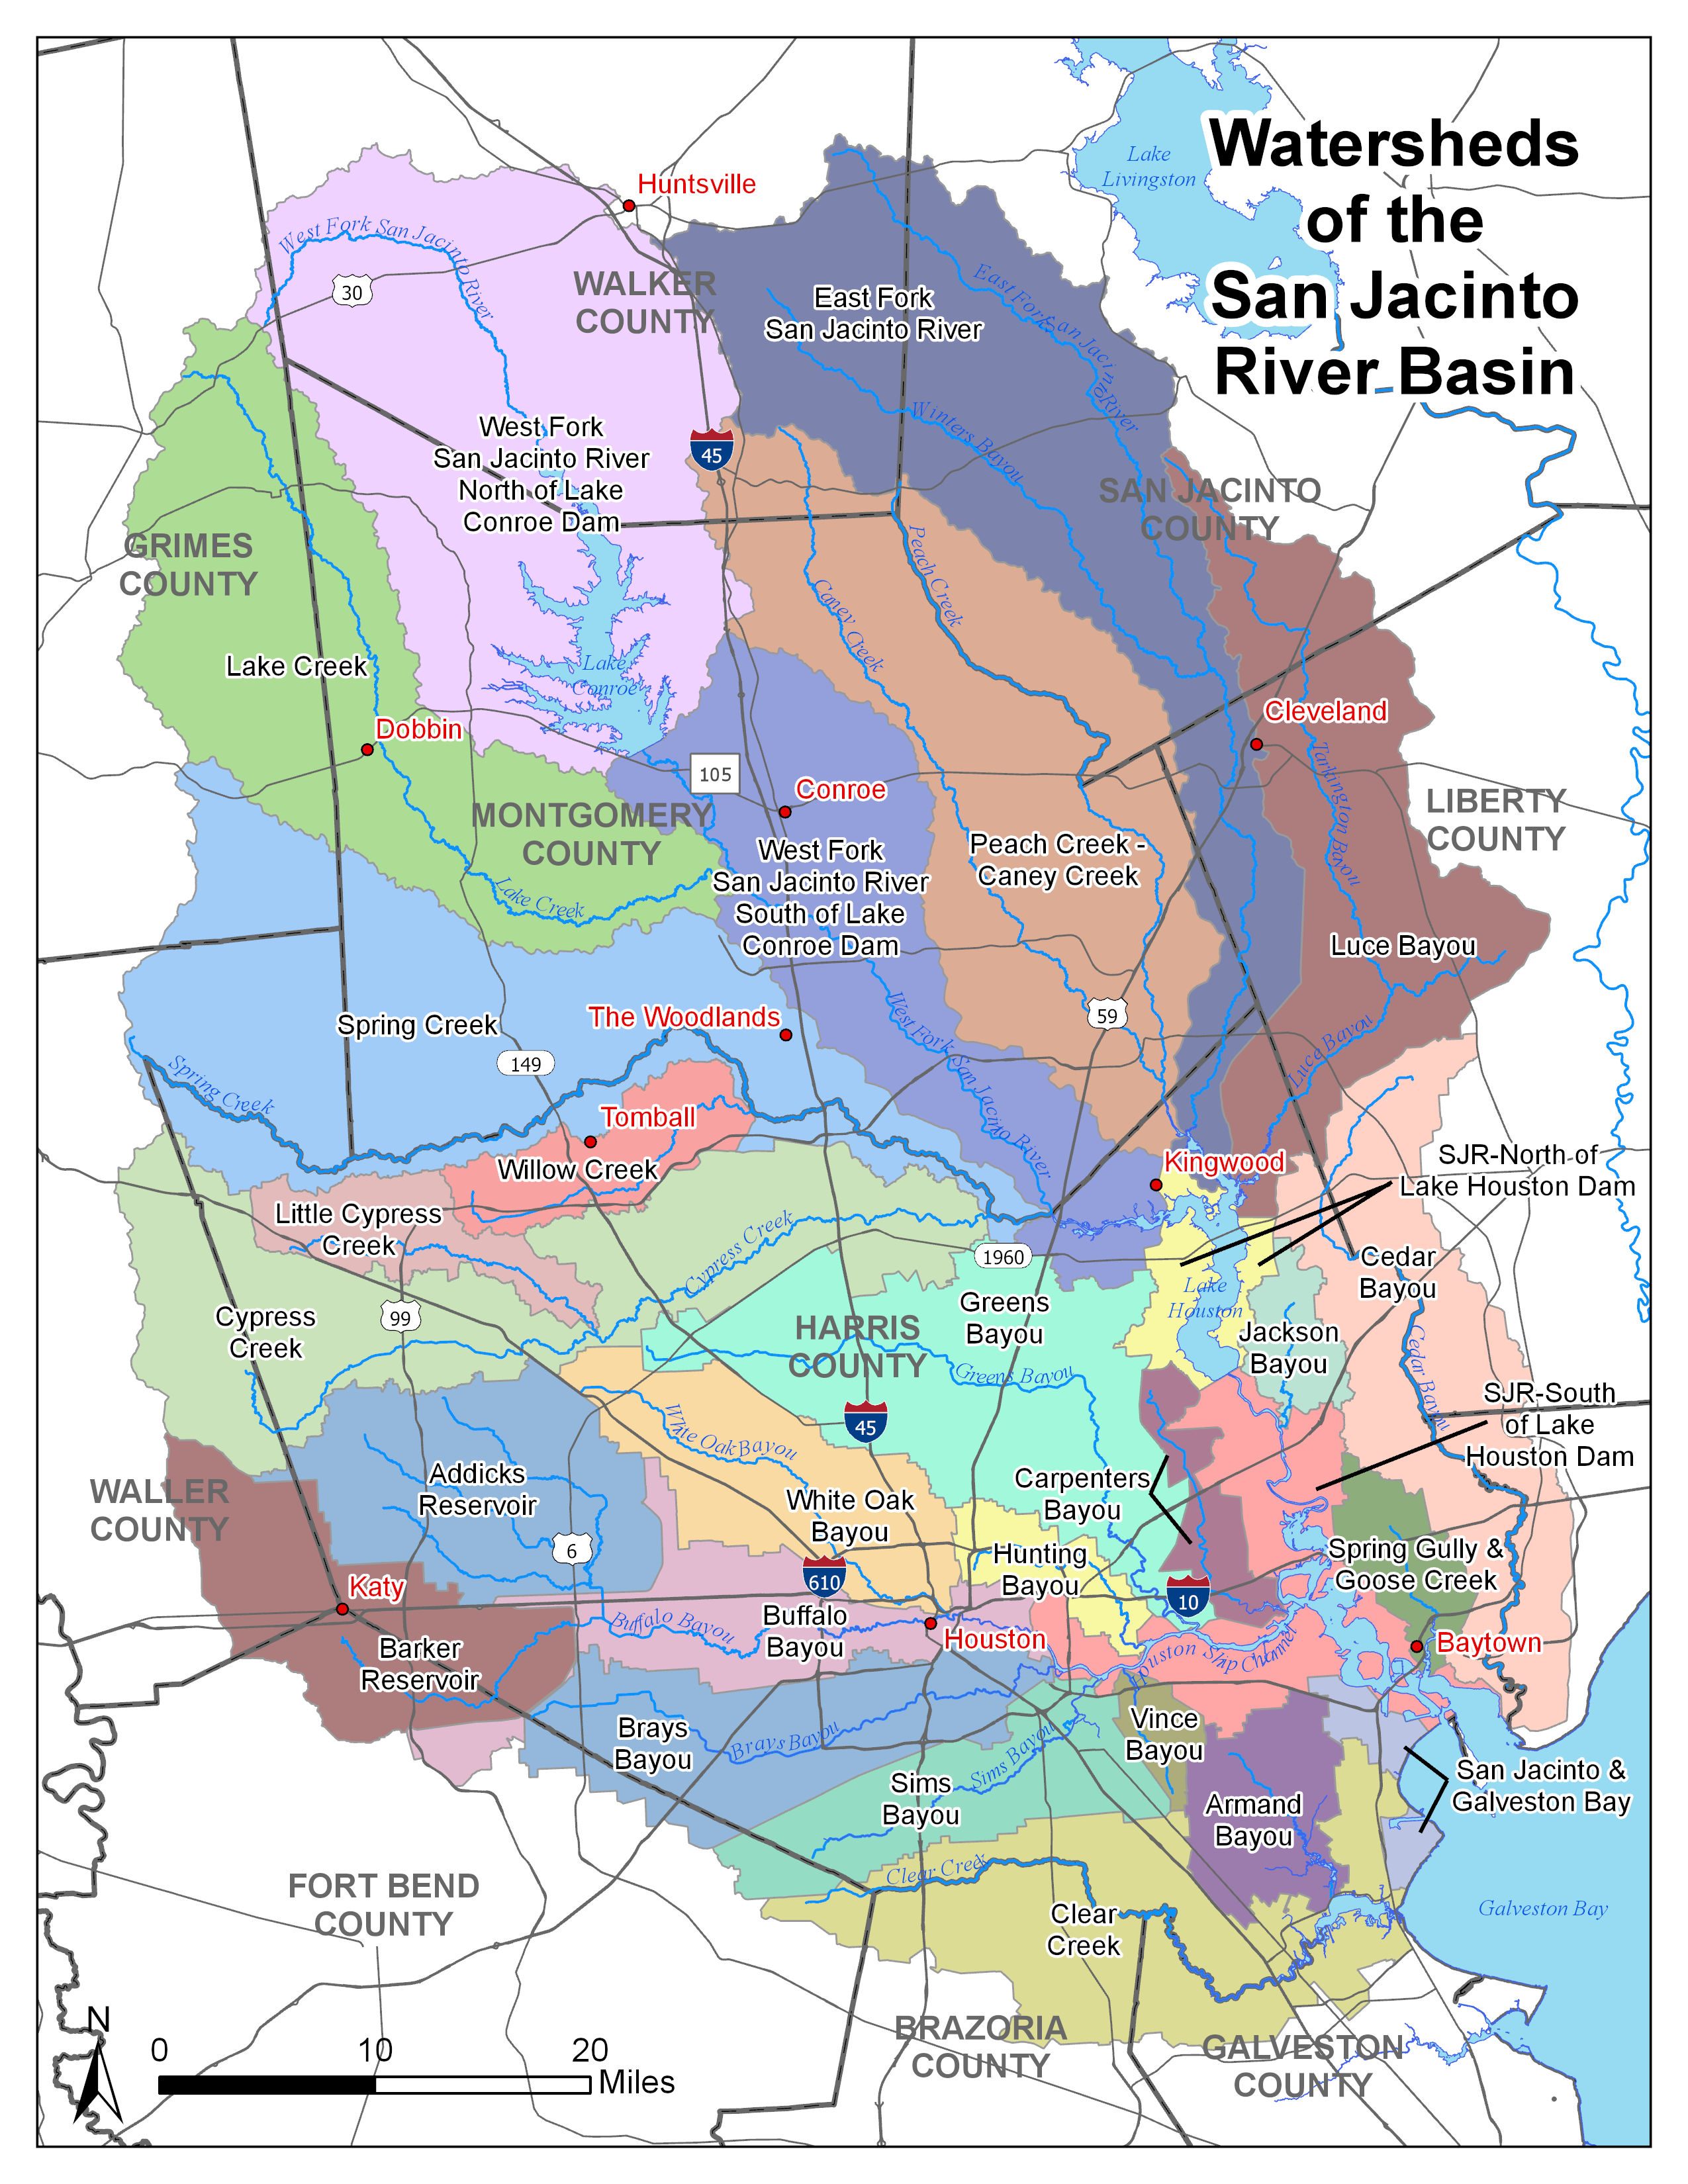 Watershed of the San Jacinto River